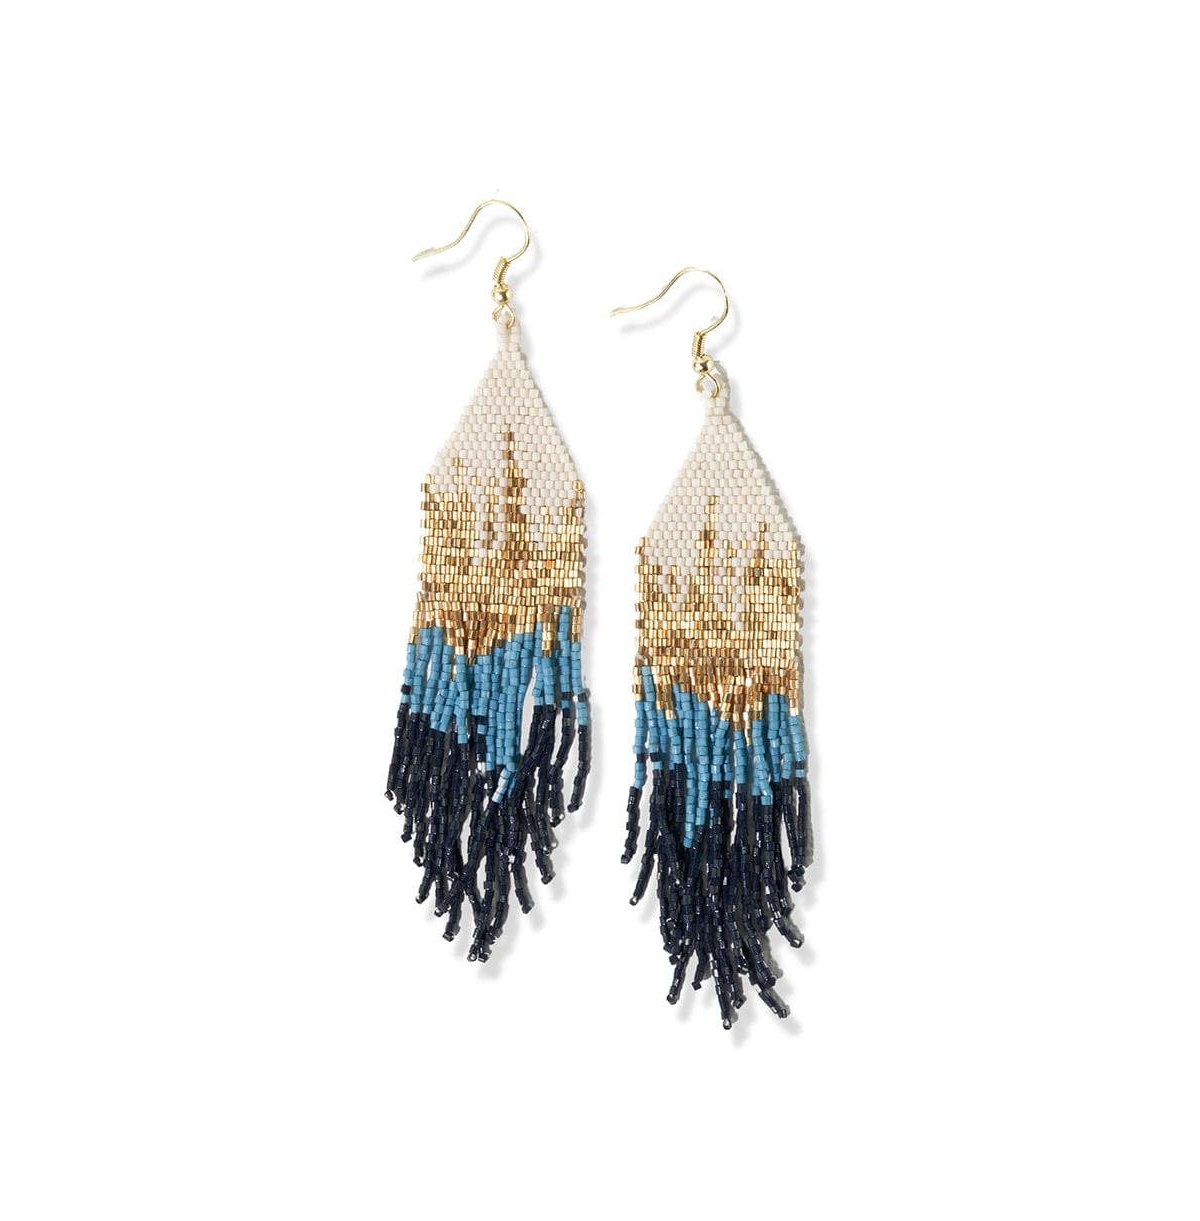 Claire Ombre Luxe Beaded Fringe Earrings - Teal Mint